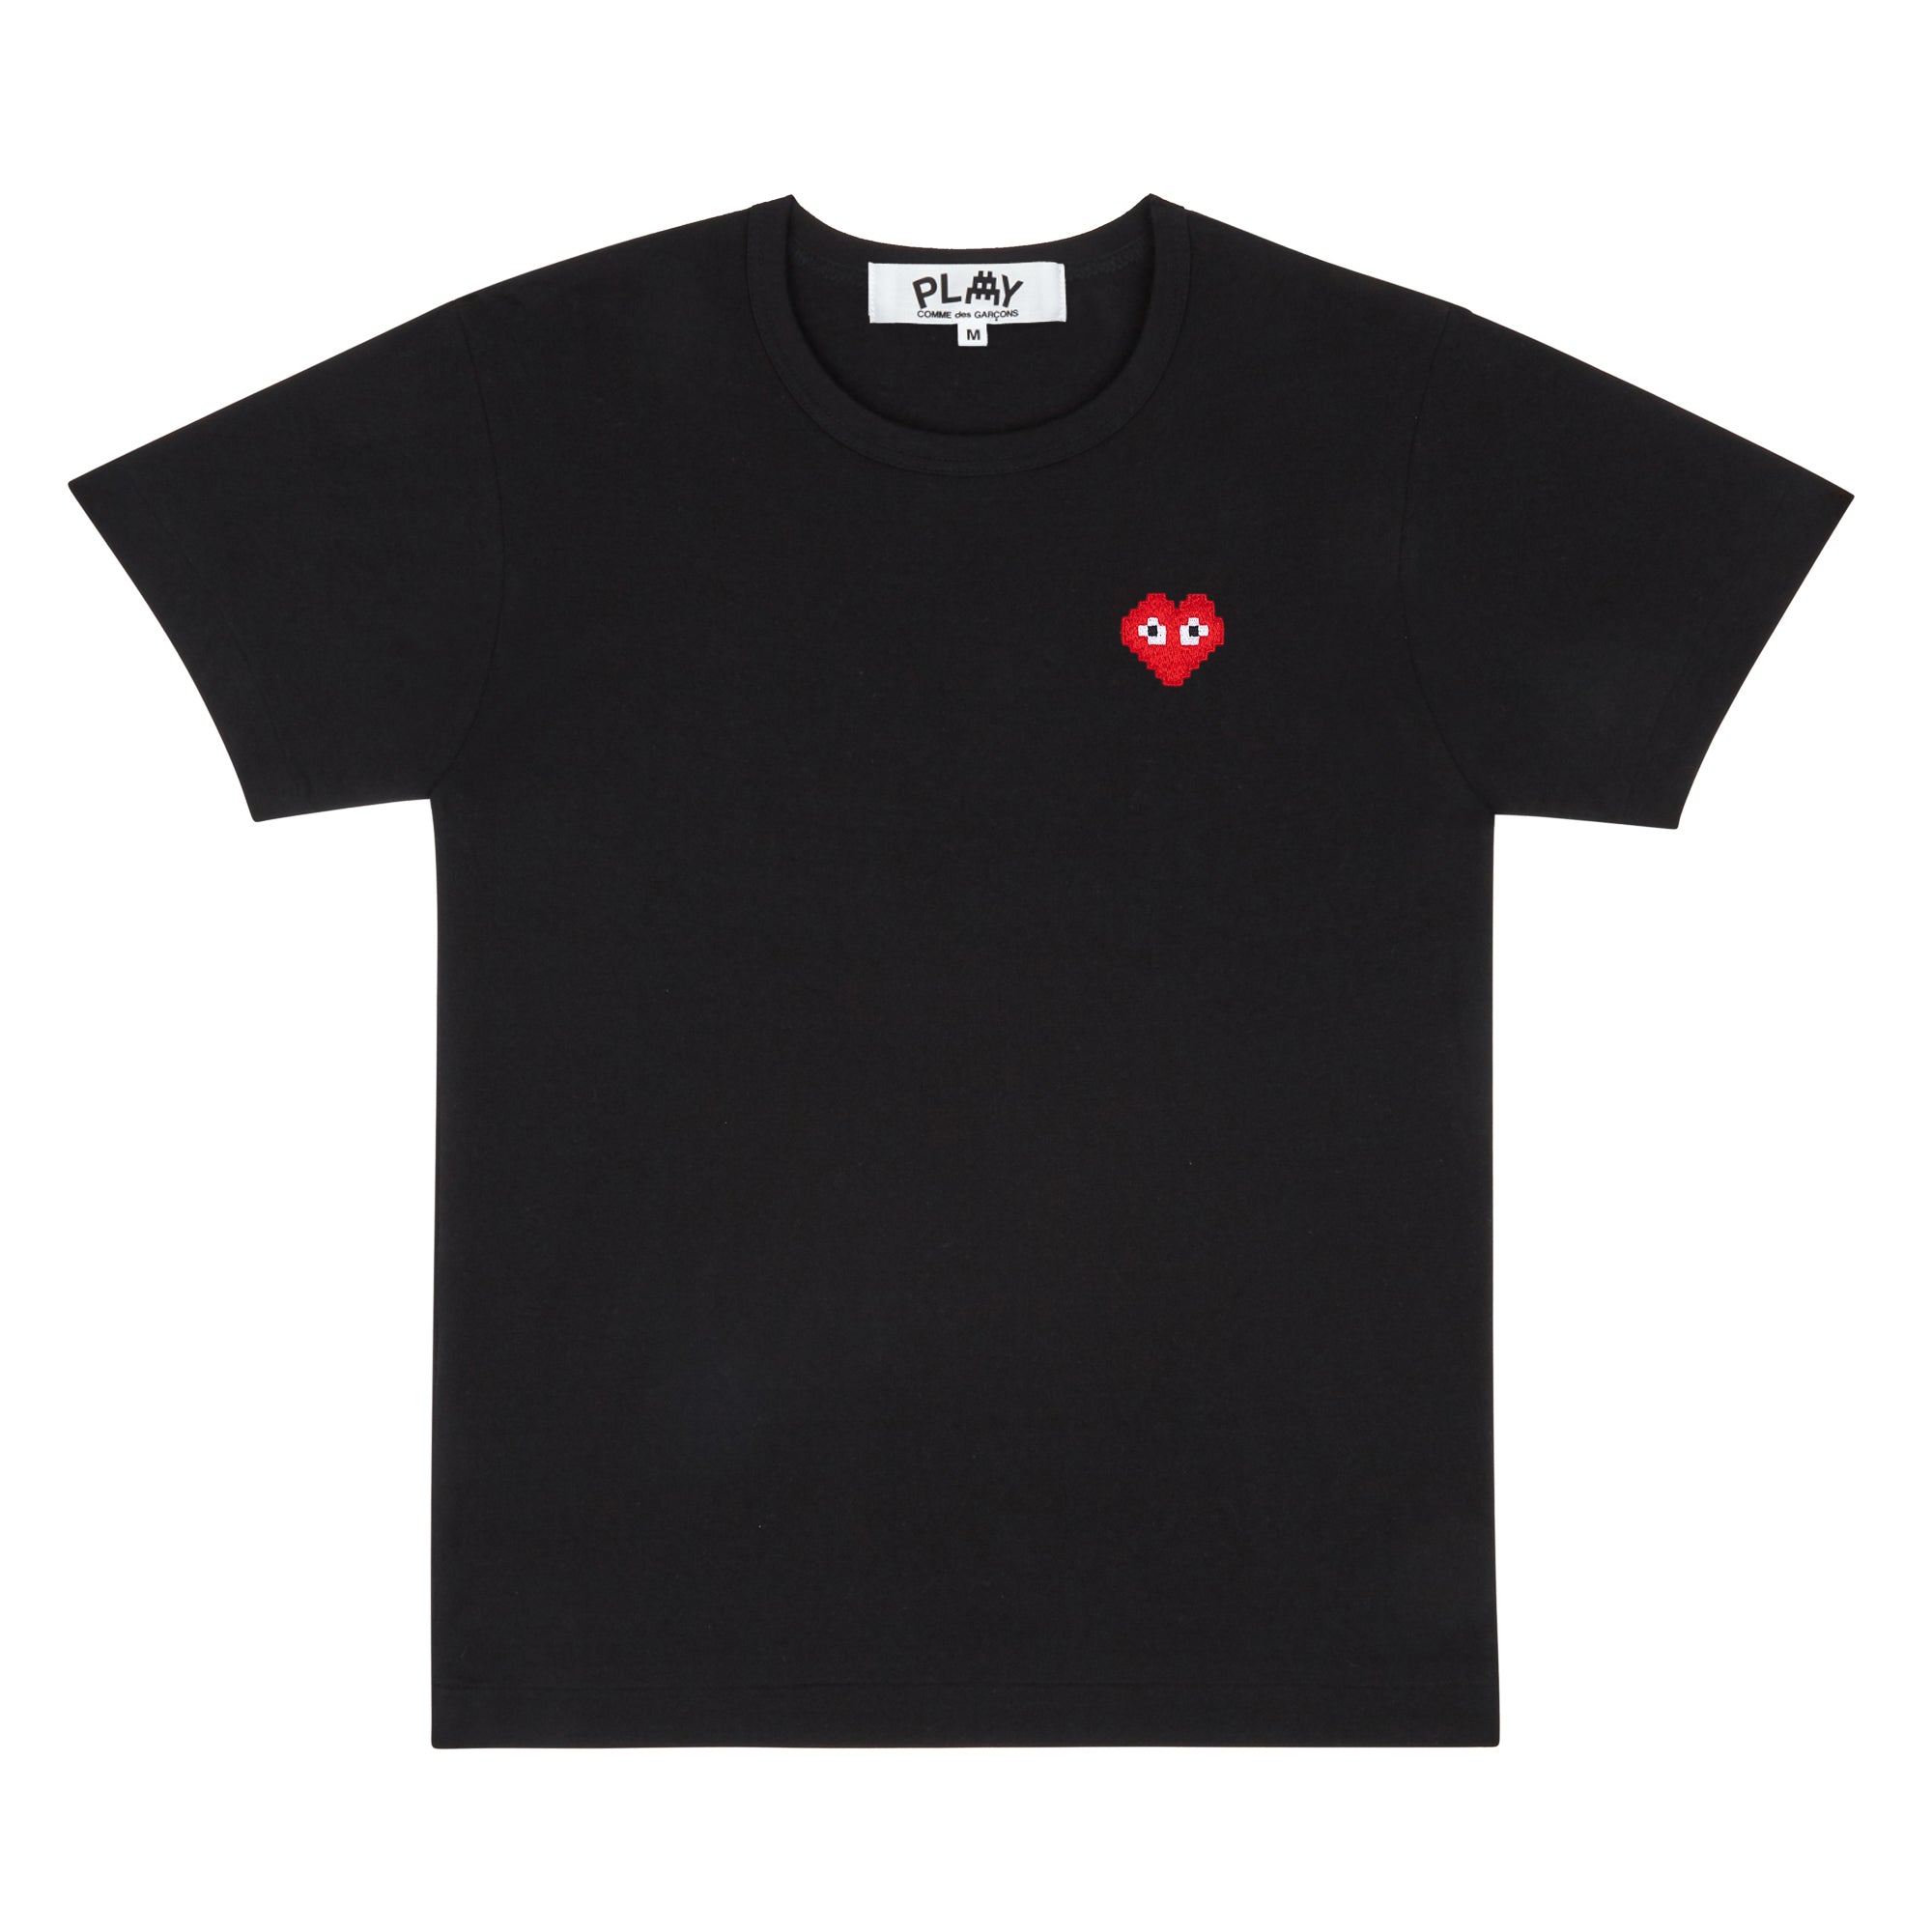 PLAY - the Artist Invader T-Shirt - (T321)(T322)(Black) view 1